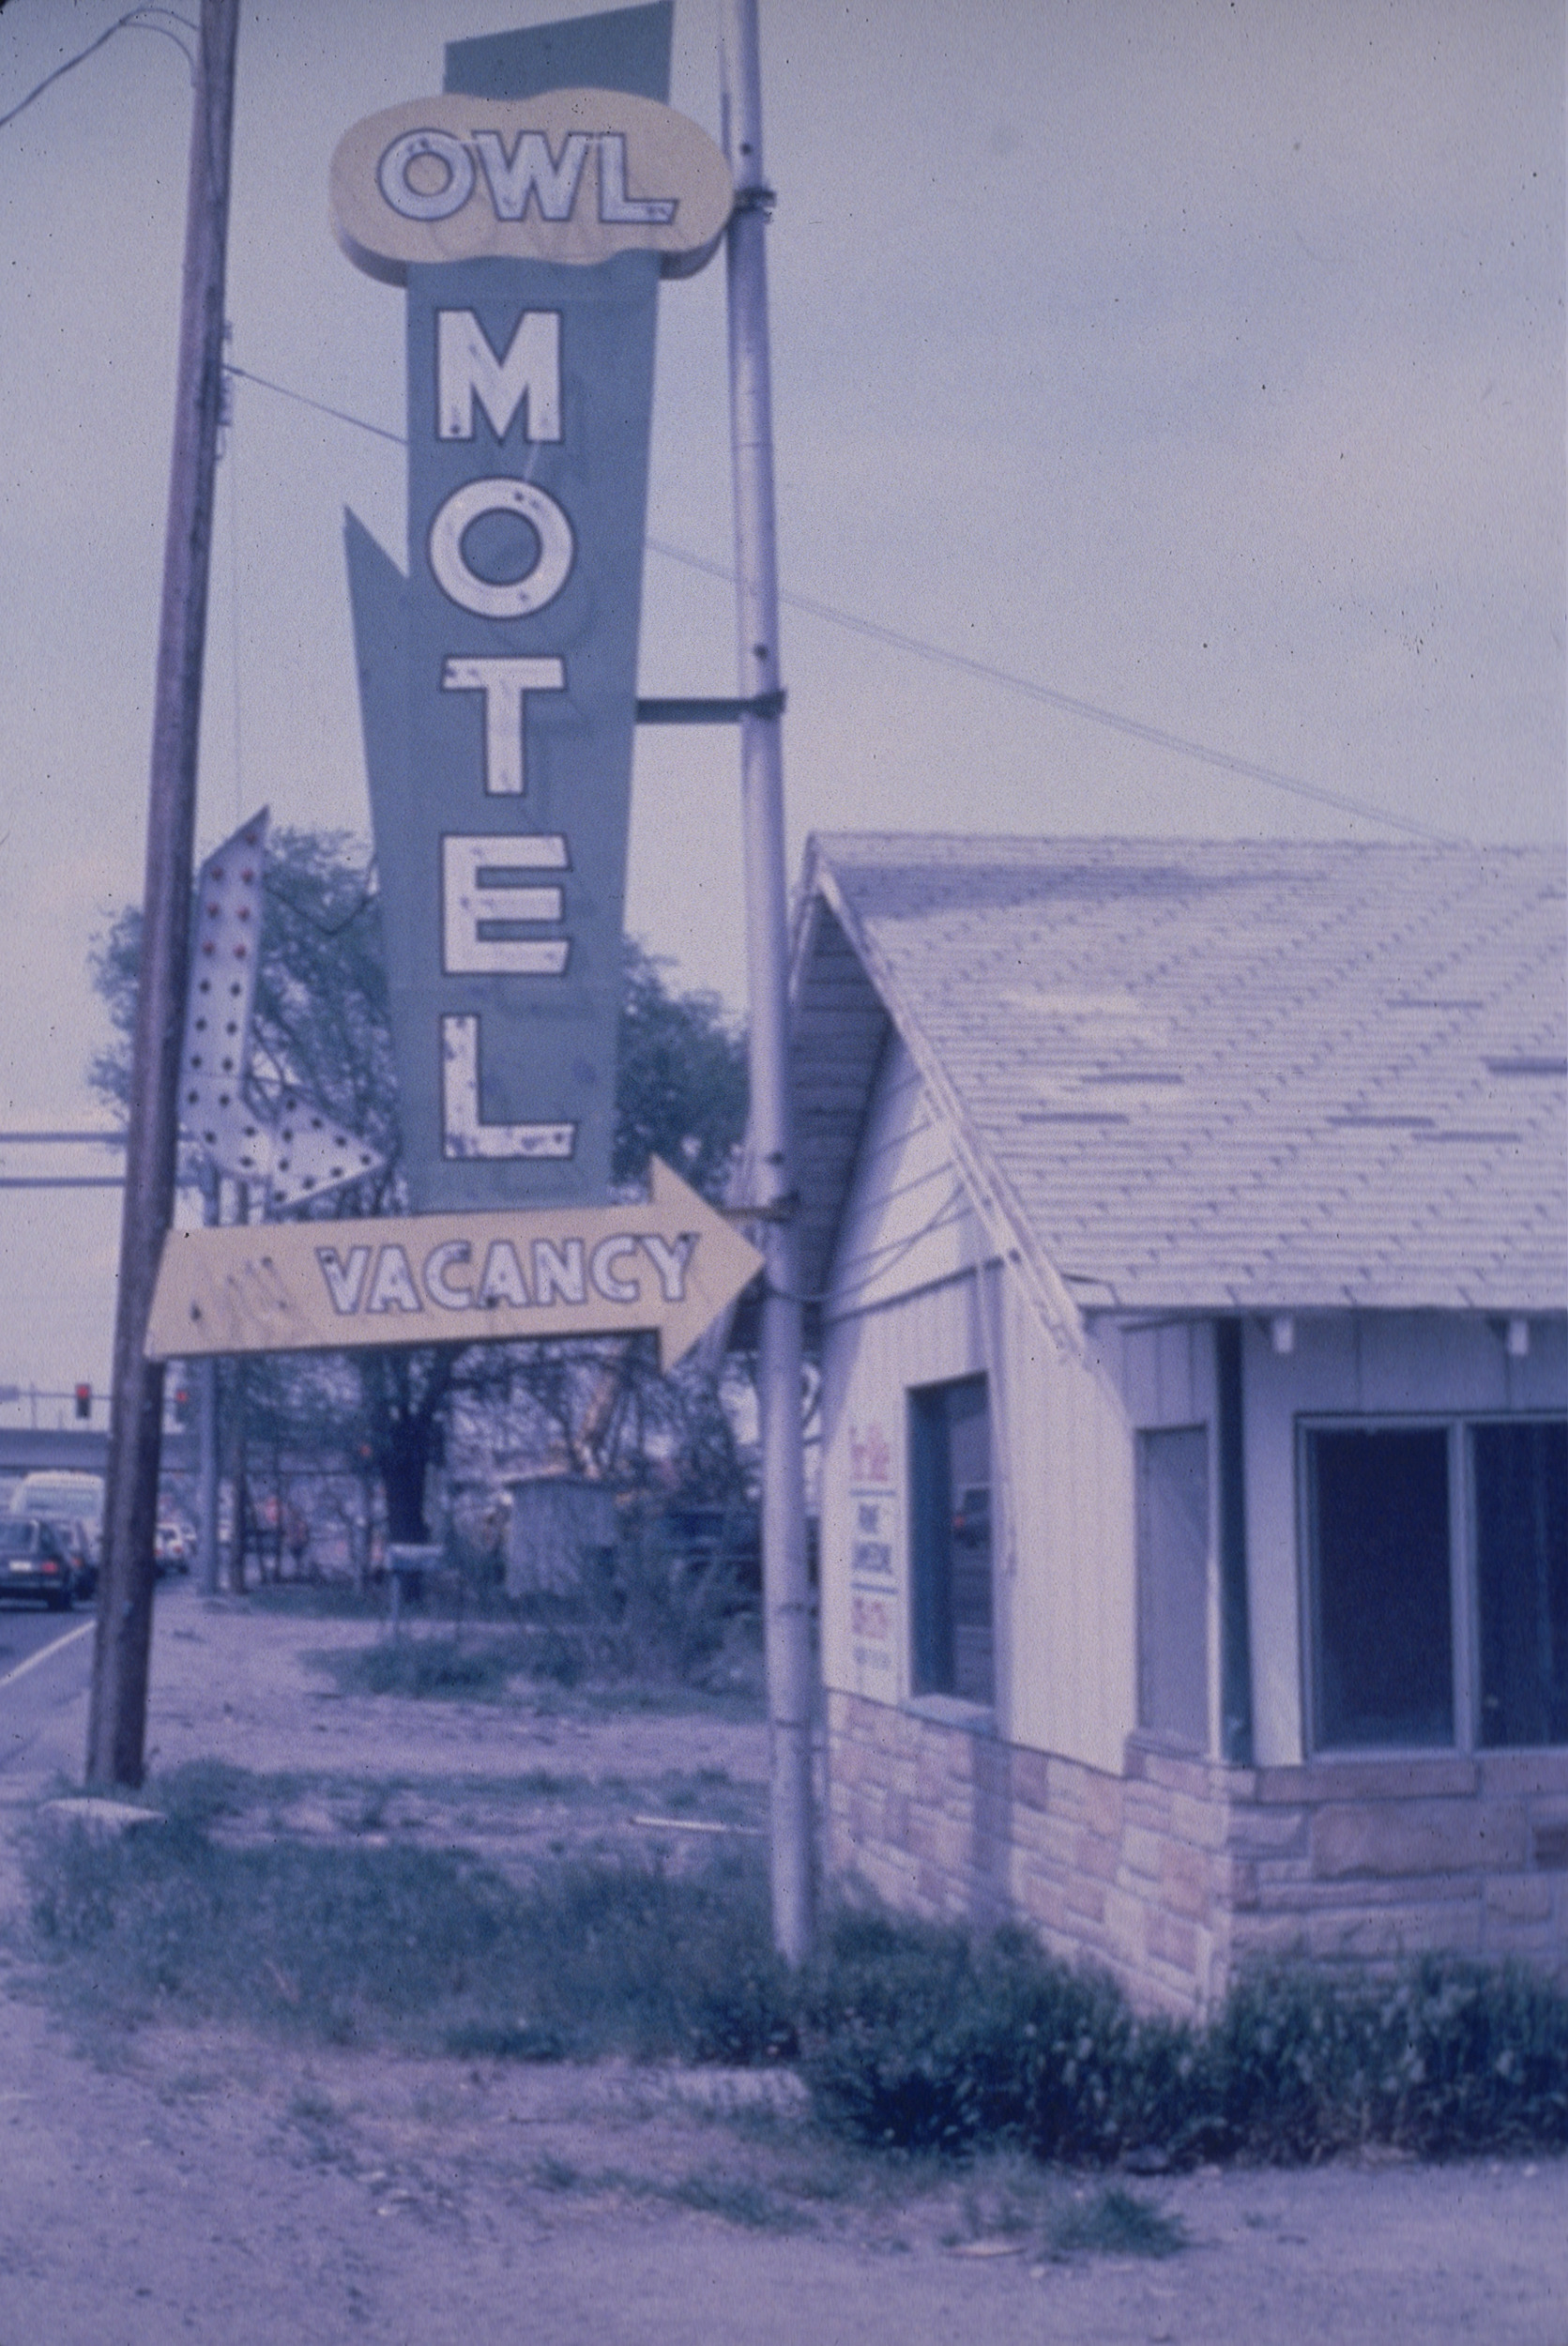 Slide of the neon sign for the Owl Motel, Reno, Nevada, 1986